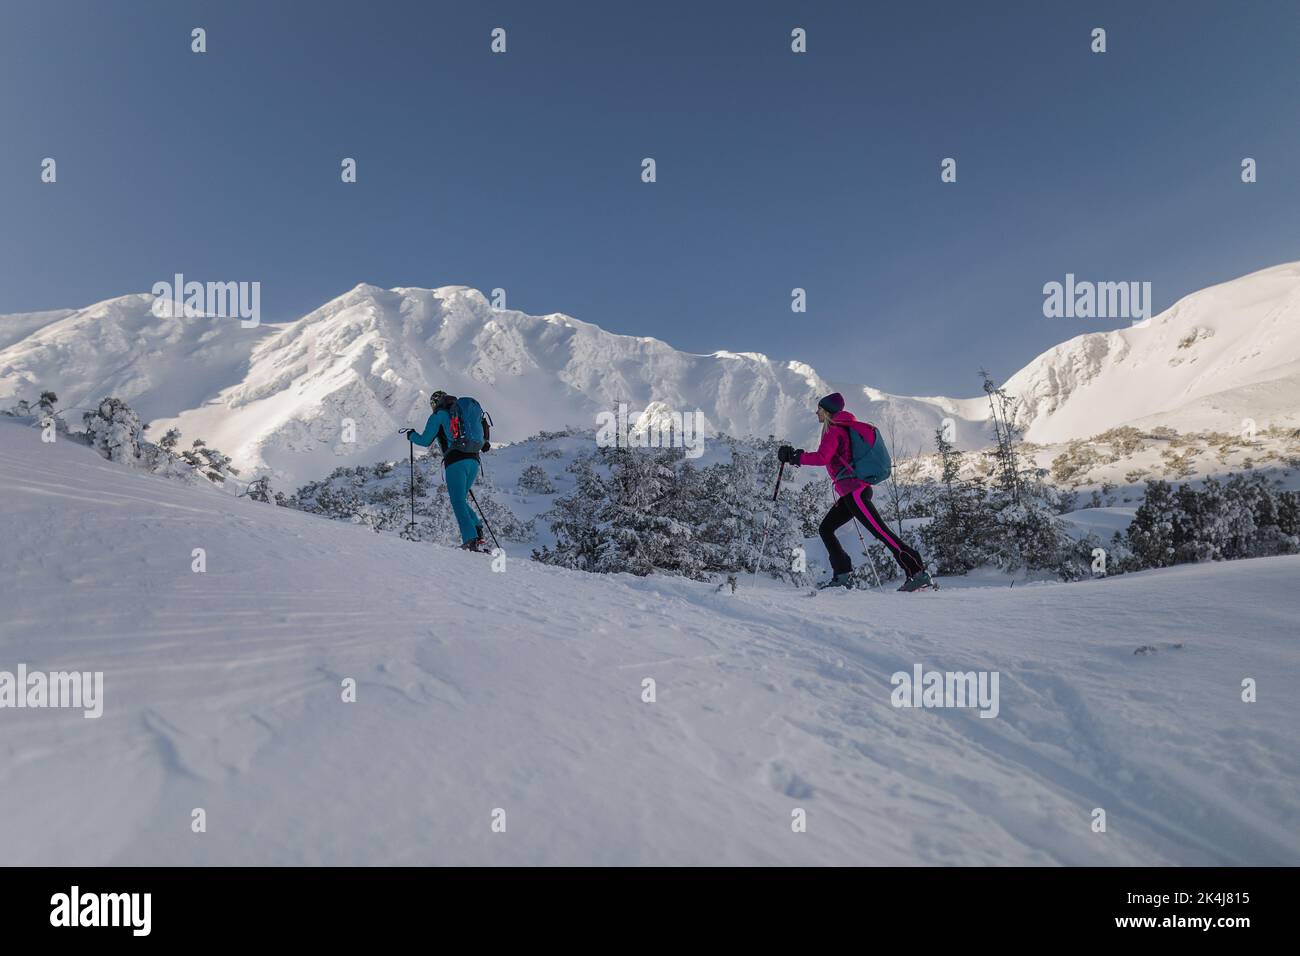 Low angle view of ski touring couple hiking up in mountains. Stock Photo